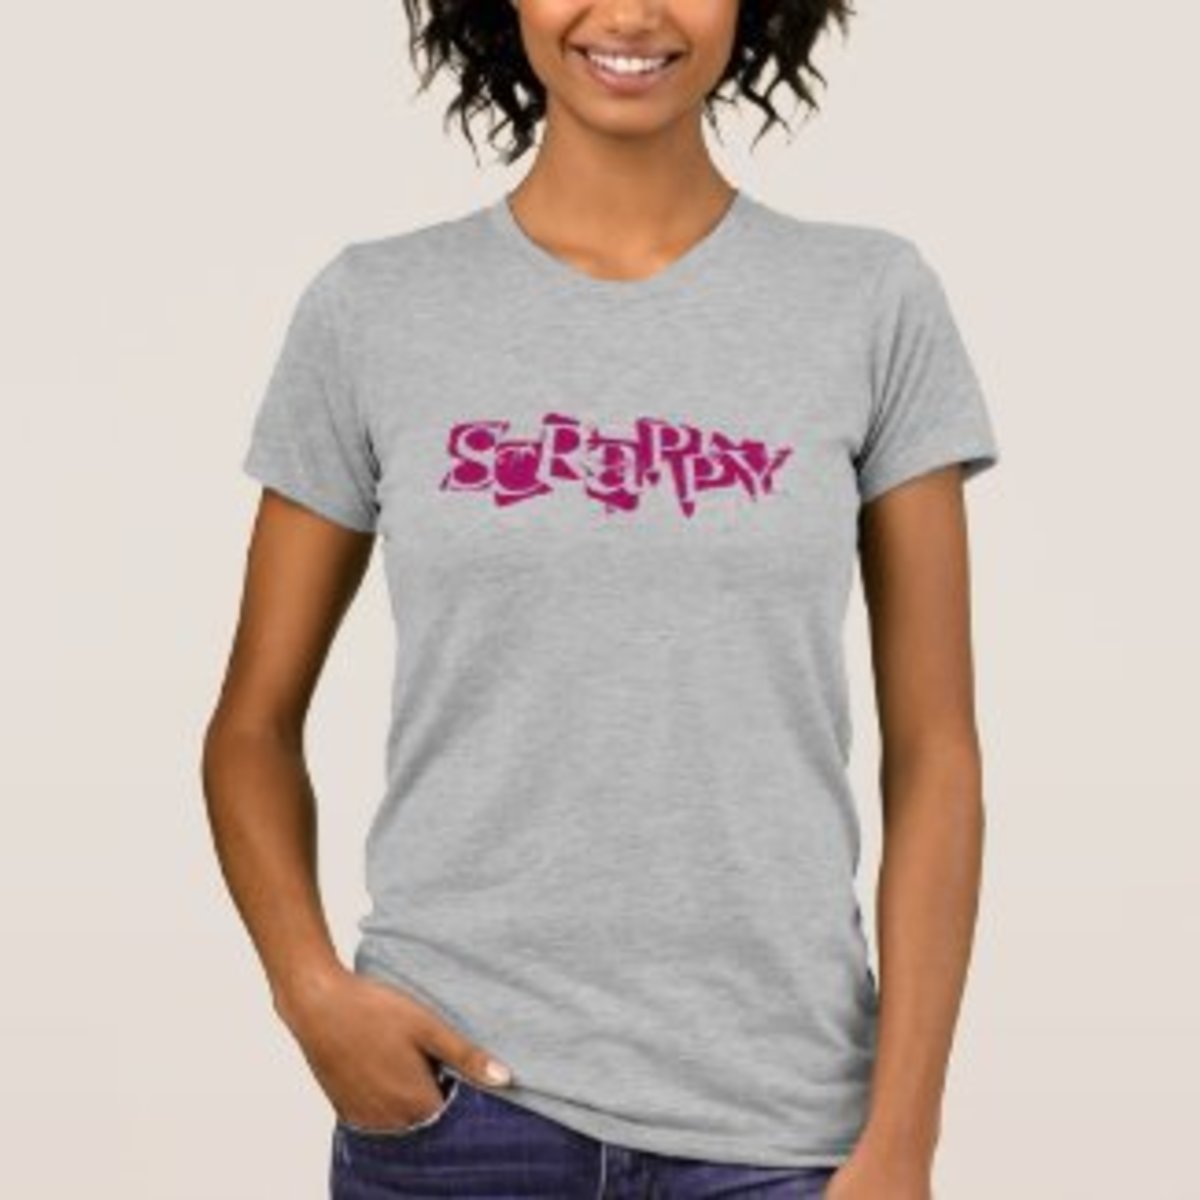 Scrappy t shirt -- American Apparel,  made in USA